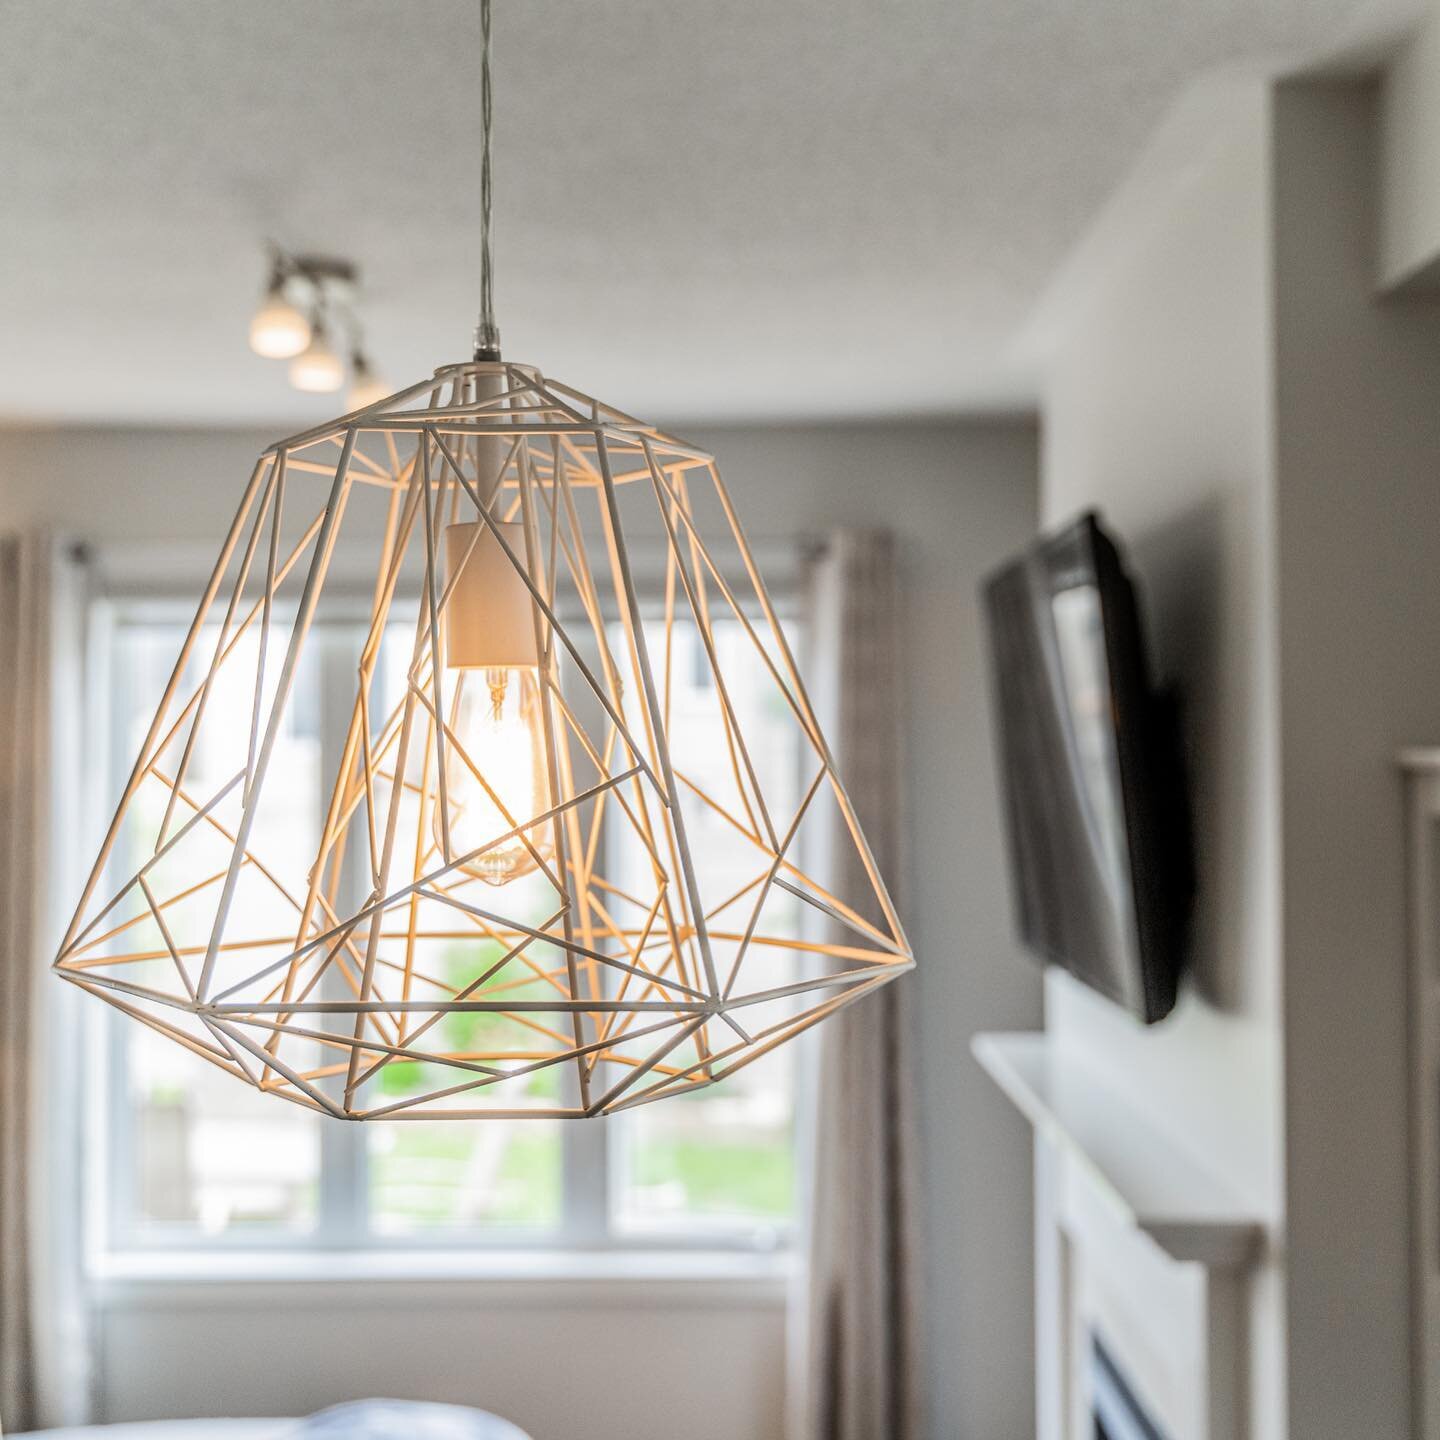 Unique light fixtures can really change the feel of a house... even make a house feel more like a home... and this one could be yours! 

🏠Now for sale. Go over to link in bio @ryanbenjaminrealtor for more info on this desirable detached 3 bedroom, 3